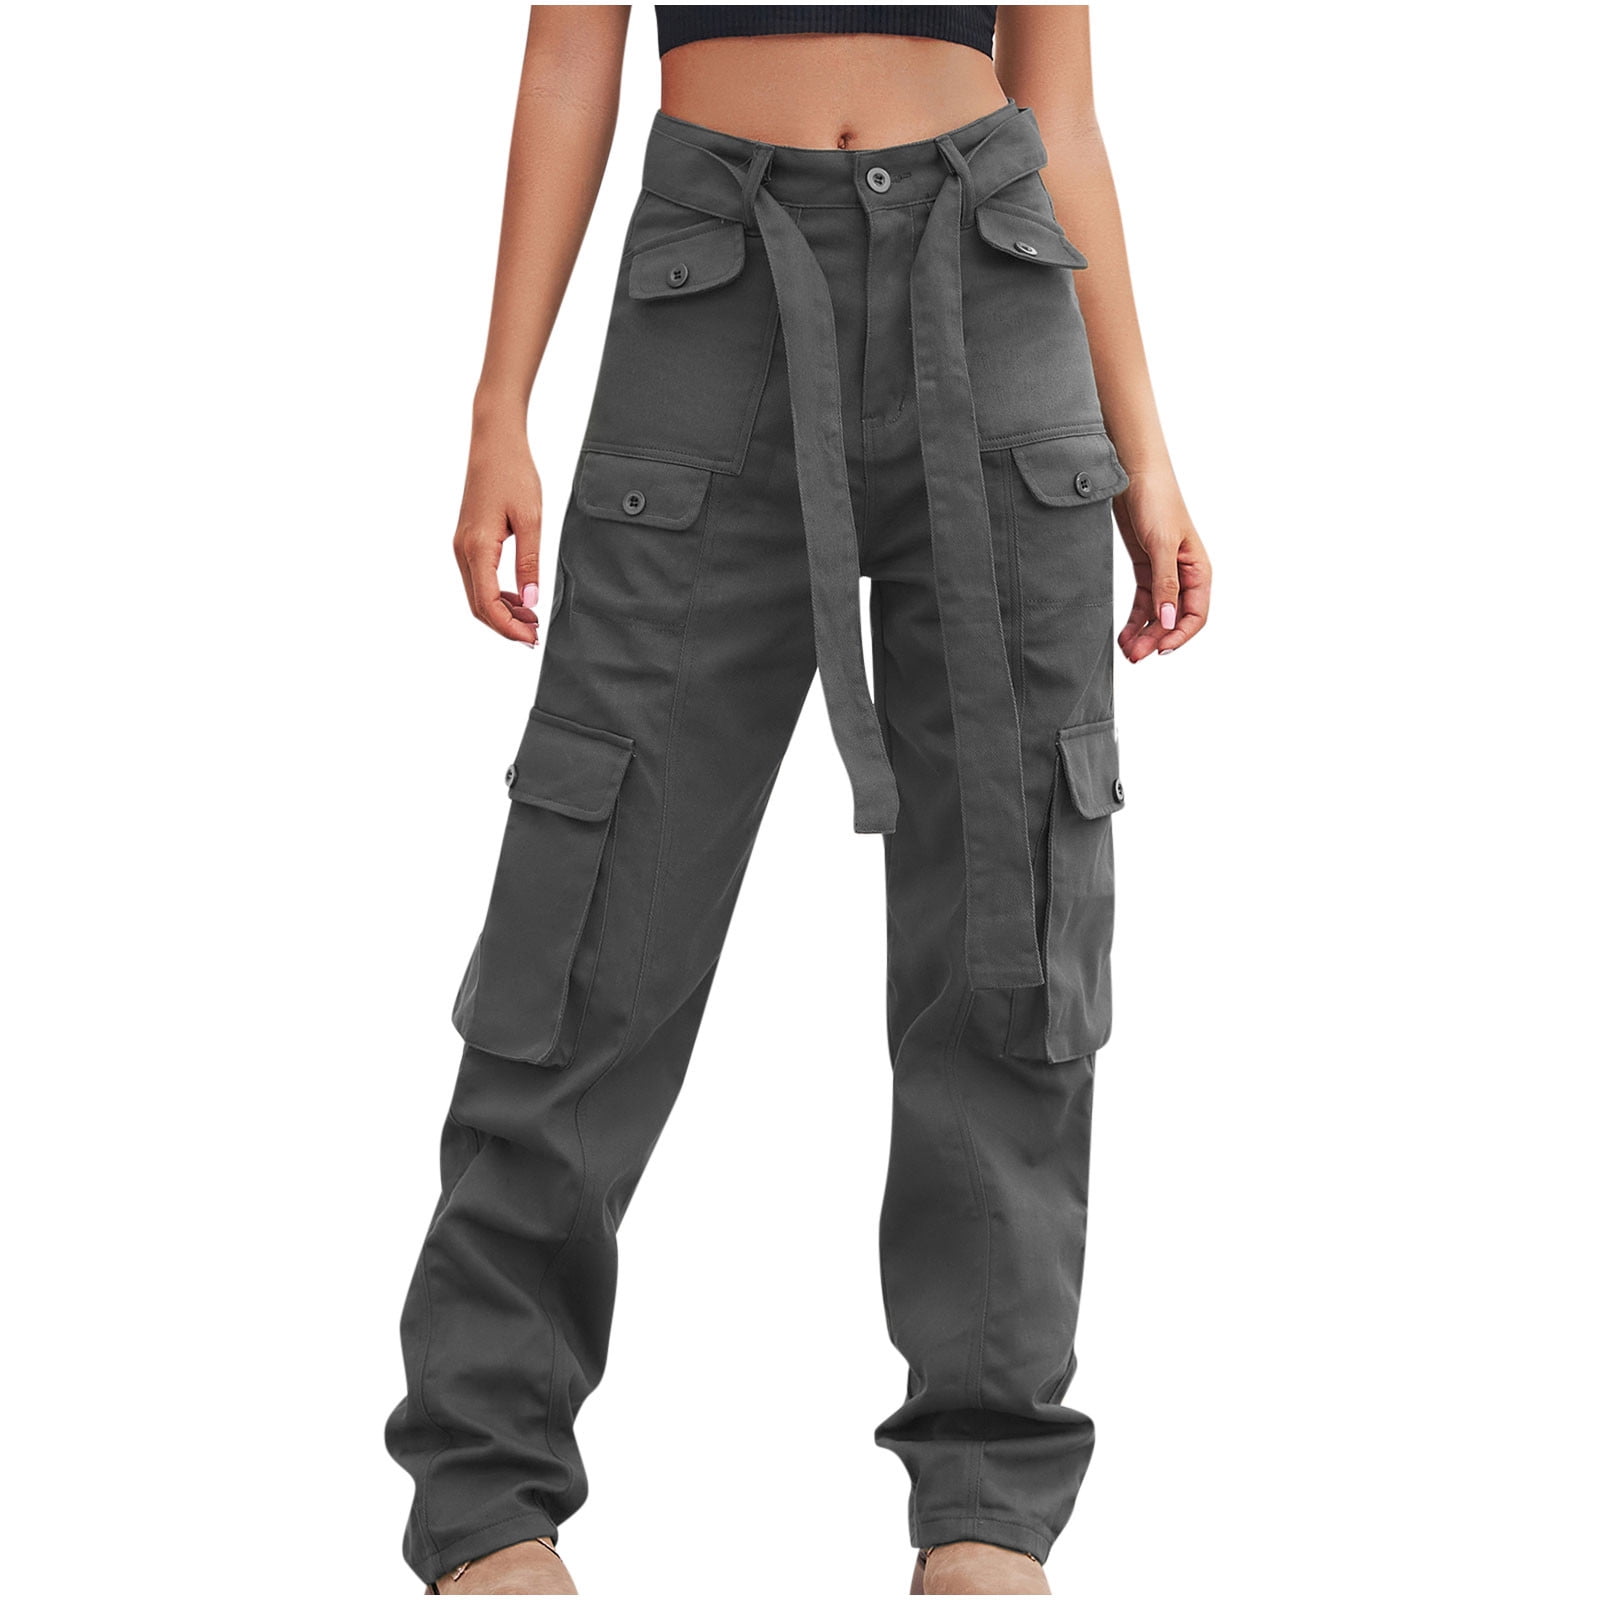 RQYYD Cargo Pants Women Casual Loose High Waisted Straight Leg Baggy Pants  Trousers Lightweight Outdoor Travel Pants with Pockets(Army Green,S) 